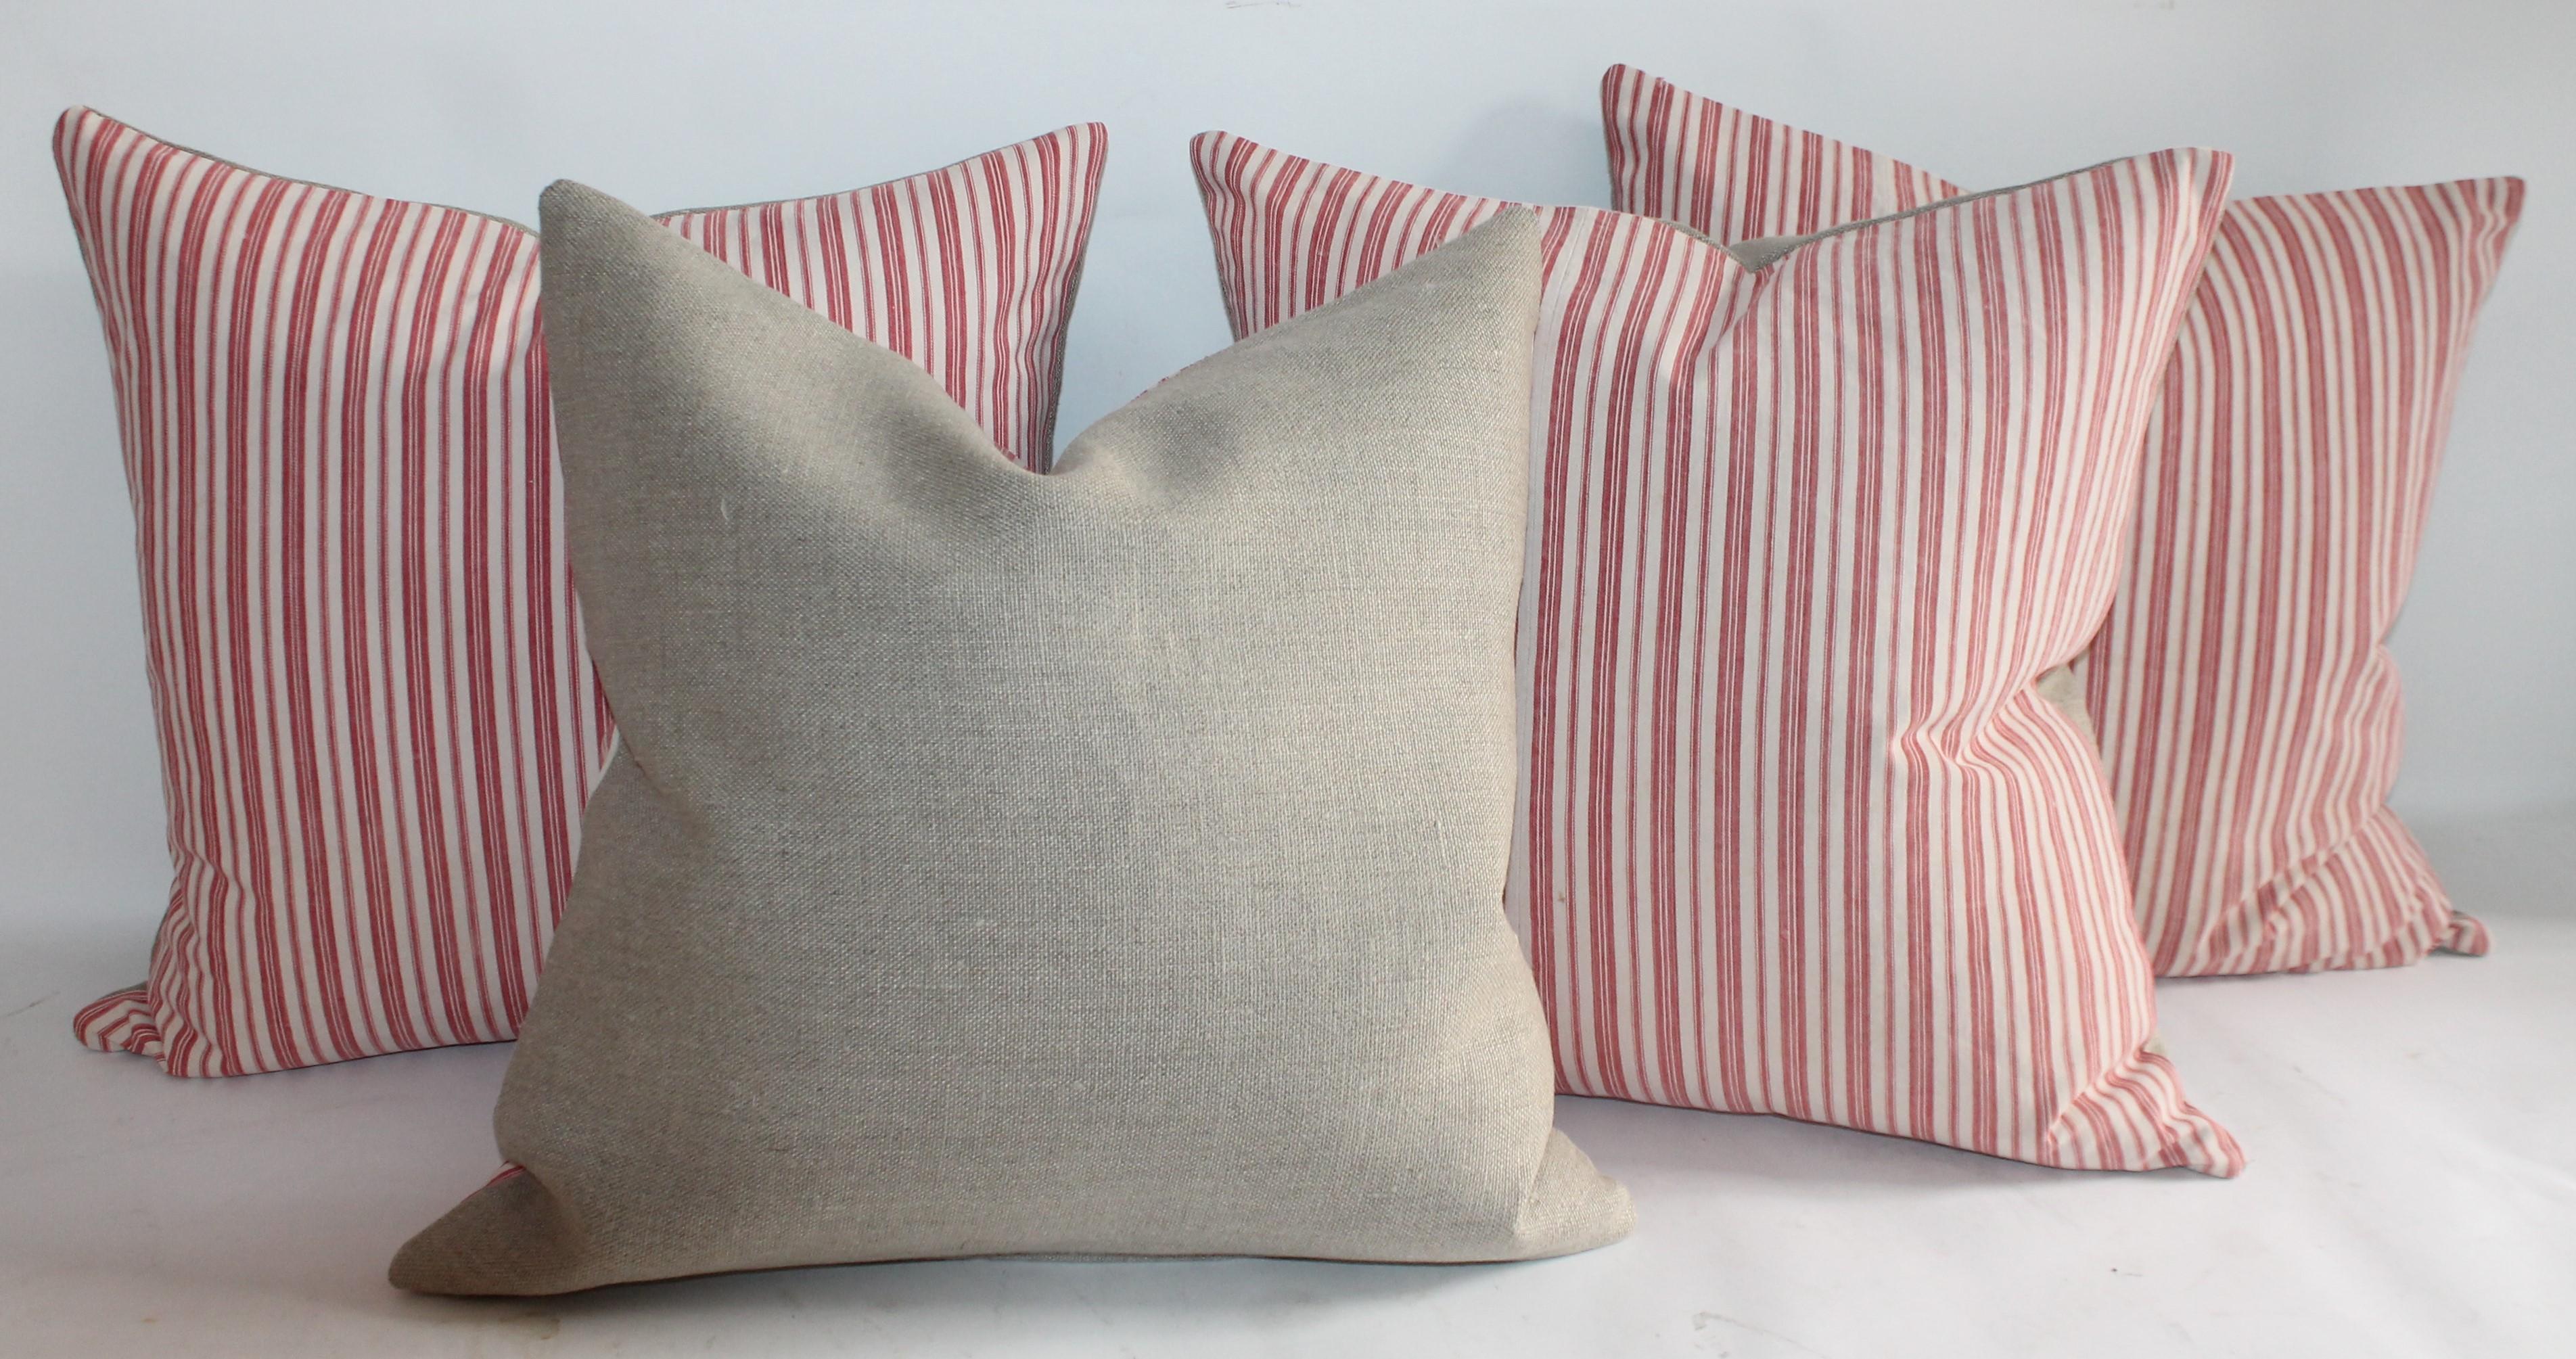 19Th century red and white ticking pillows with beige cotton linen backings. The inserts are down and feather fill.